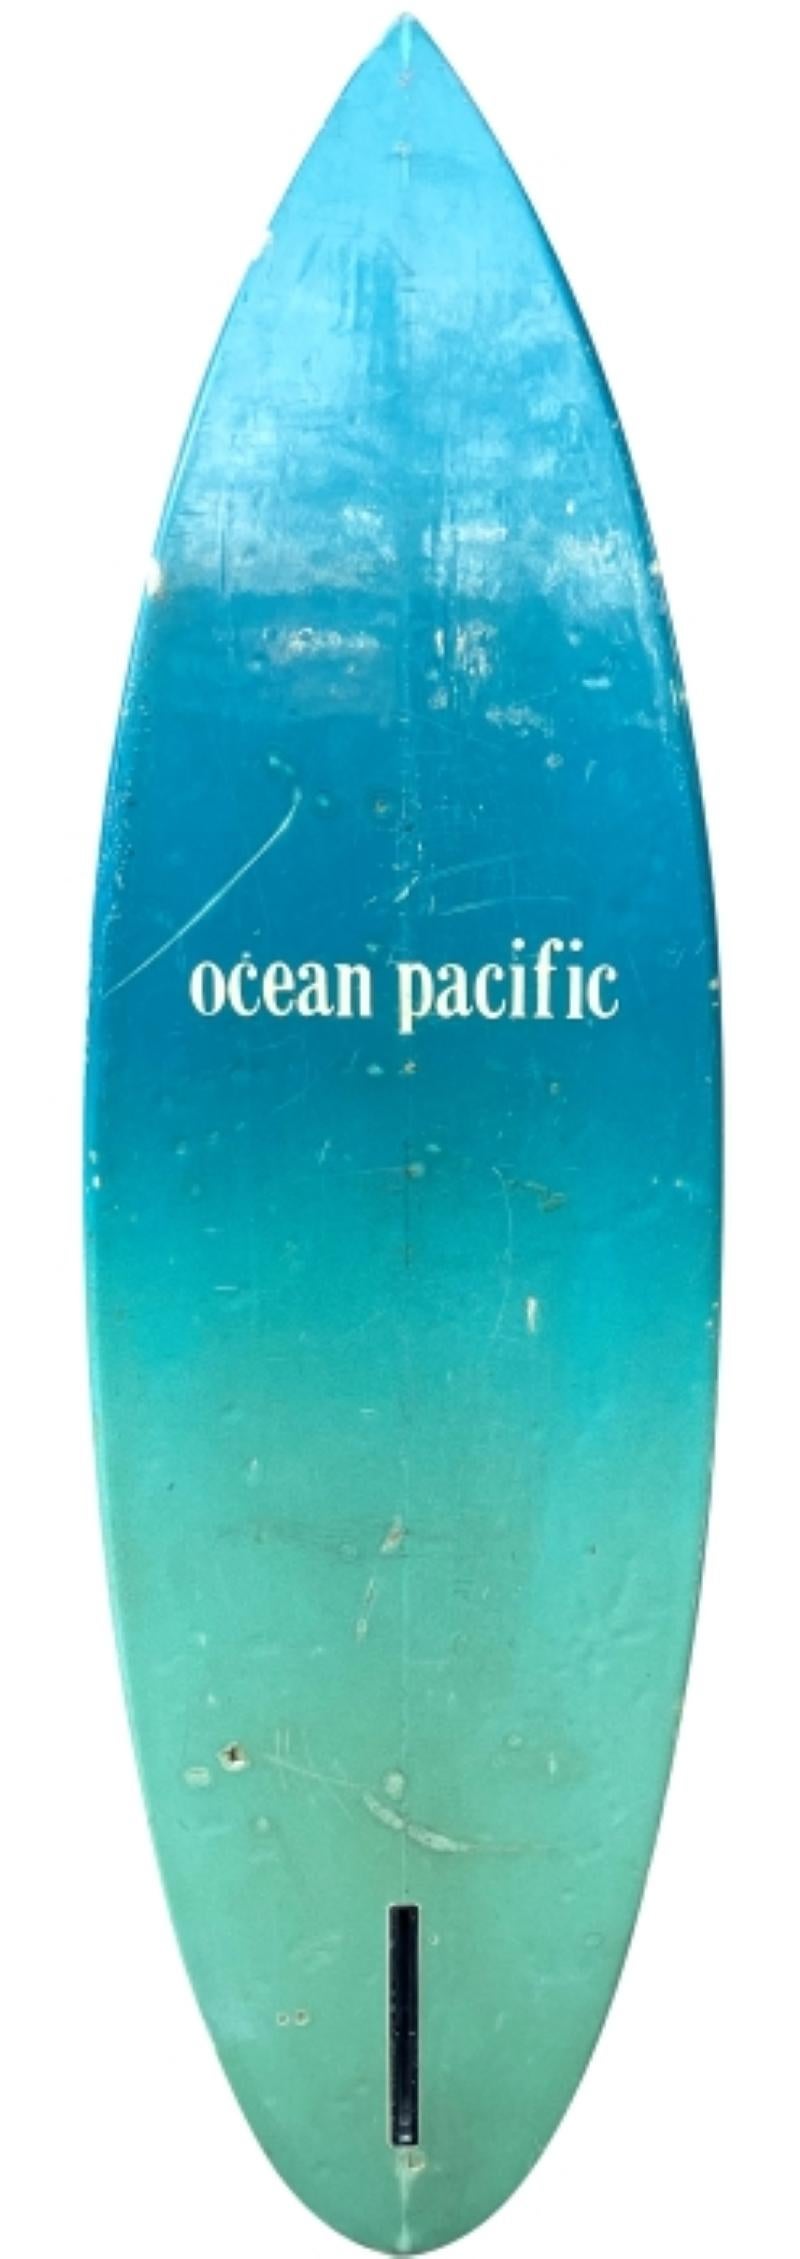 Late-1970's Ocean Pacific (Op) single-fin surfboard. Features stunning wave mural airbrush artwork done by the late Jack Meyer (1954-2007). A remarkable original surfboard work of art by a renowned surfboard artist of the 1970s-80s. 

Ocean